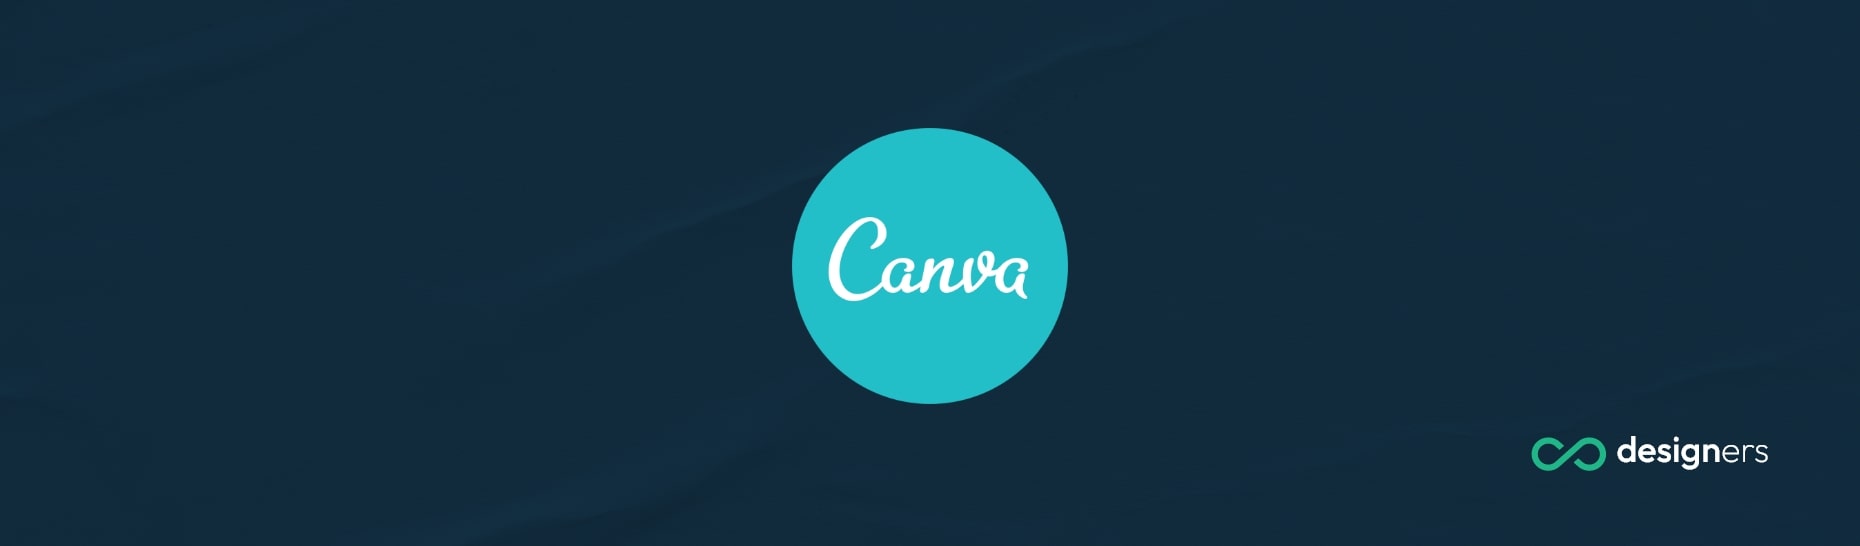 Are Canva Elements Free for Commercial Use?